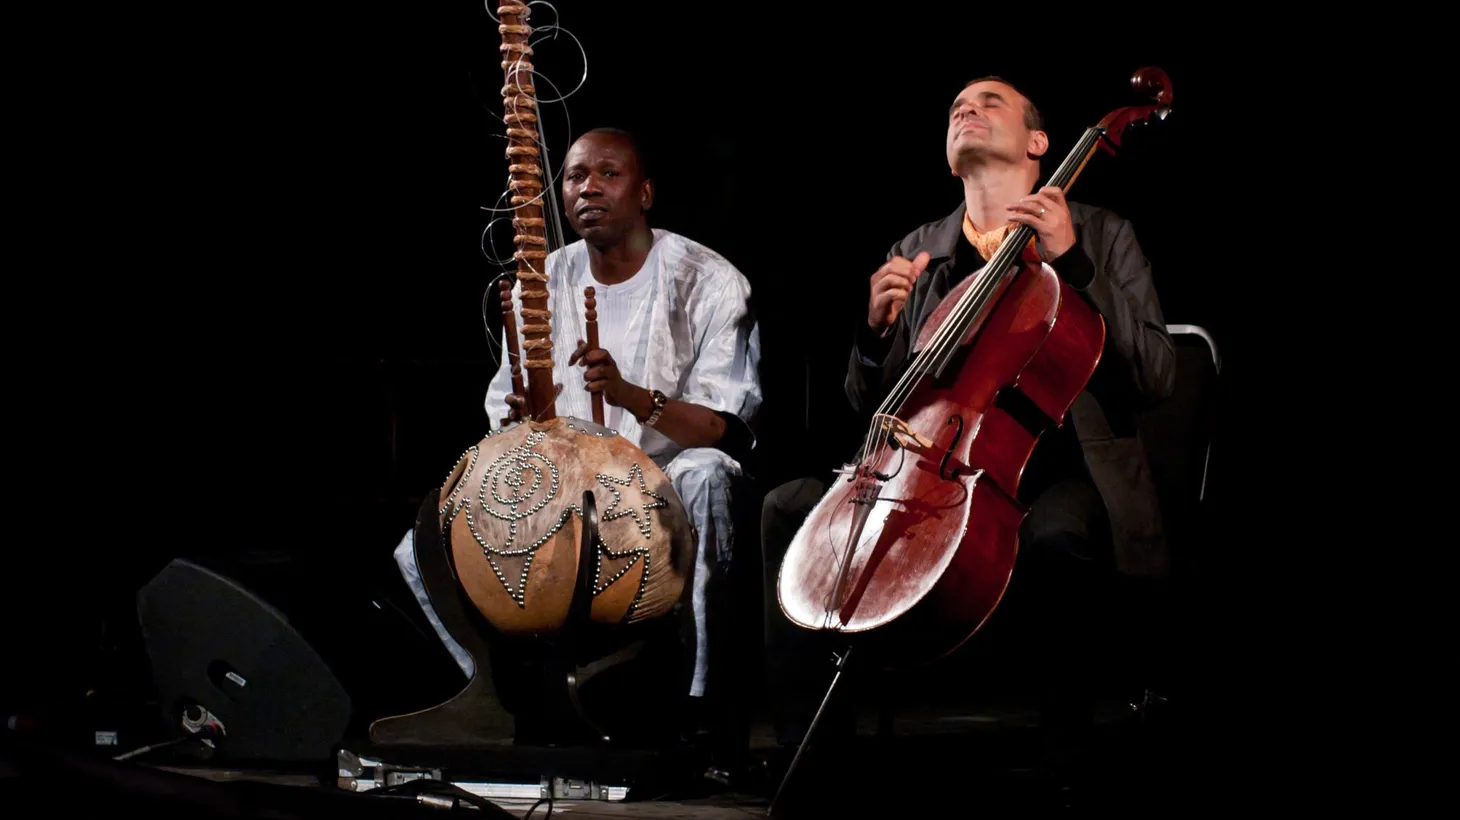 Rhythm Planet Host Tom Schnabel joins us to preview an upcoming show featuring Malian kora virtuoso Ballaké Sissoko with French cellist Vincent Segal. (10am)